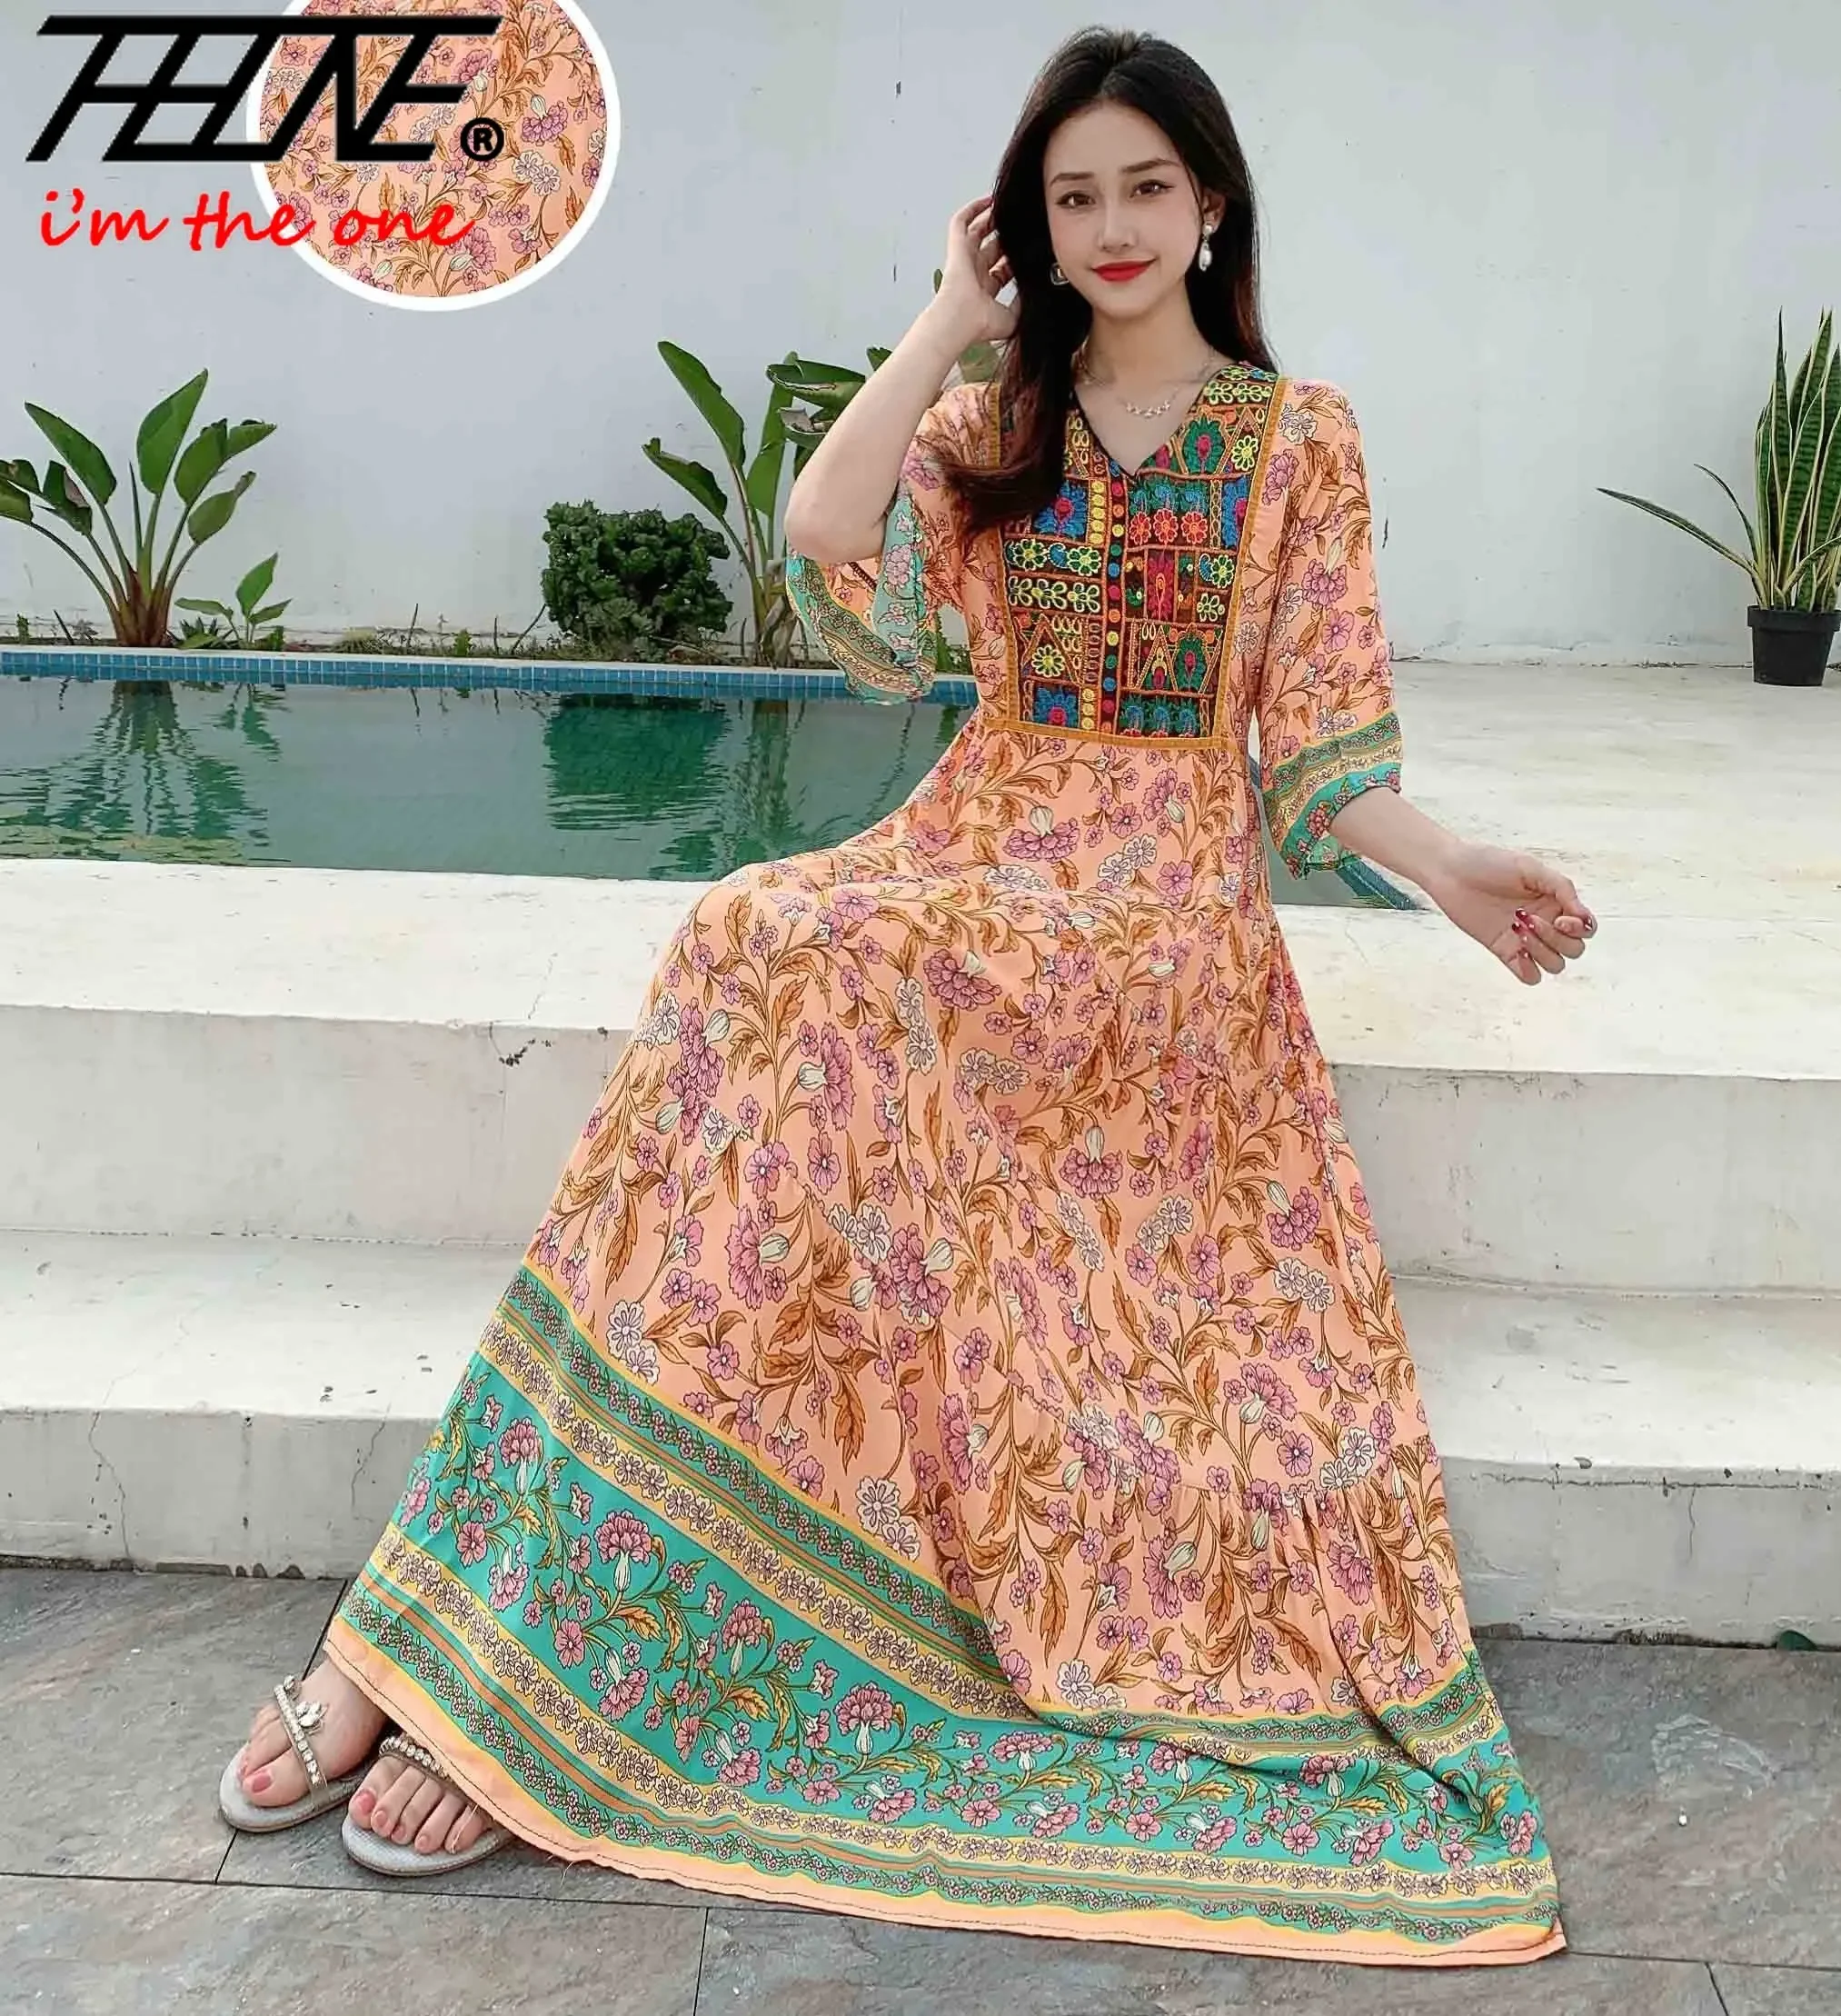 INDIAN CLOTHING ONLINE USA – Raas